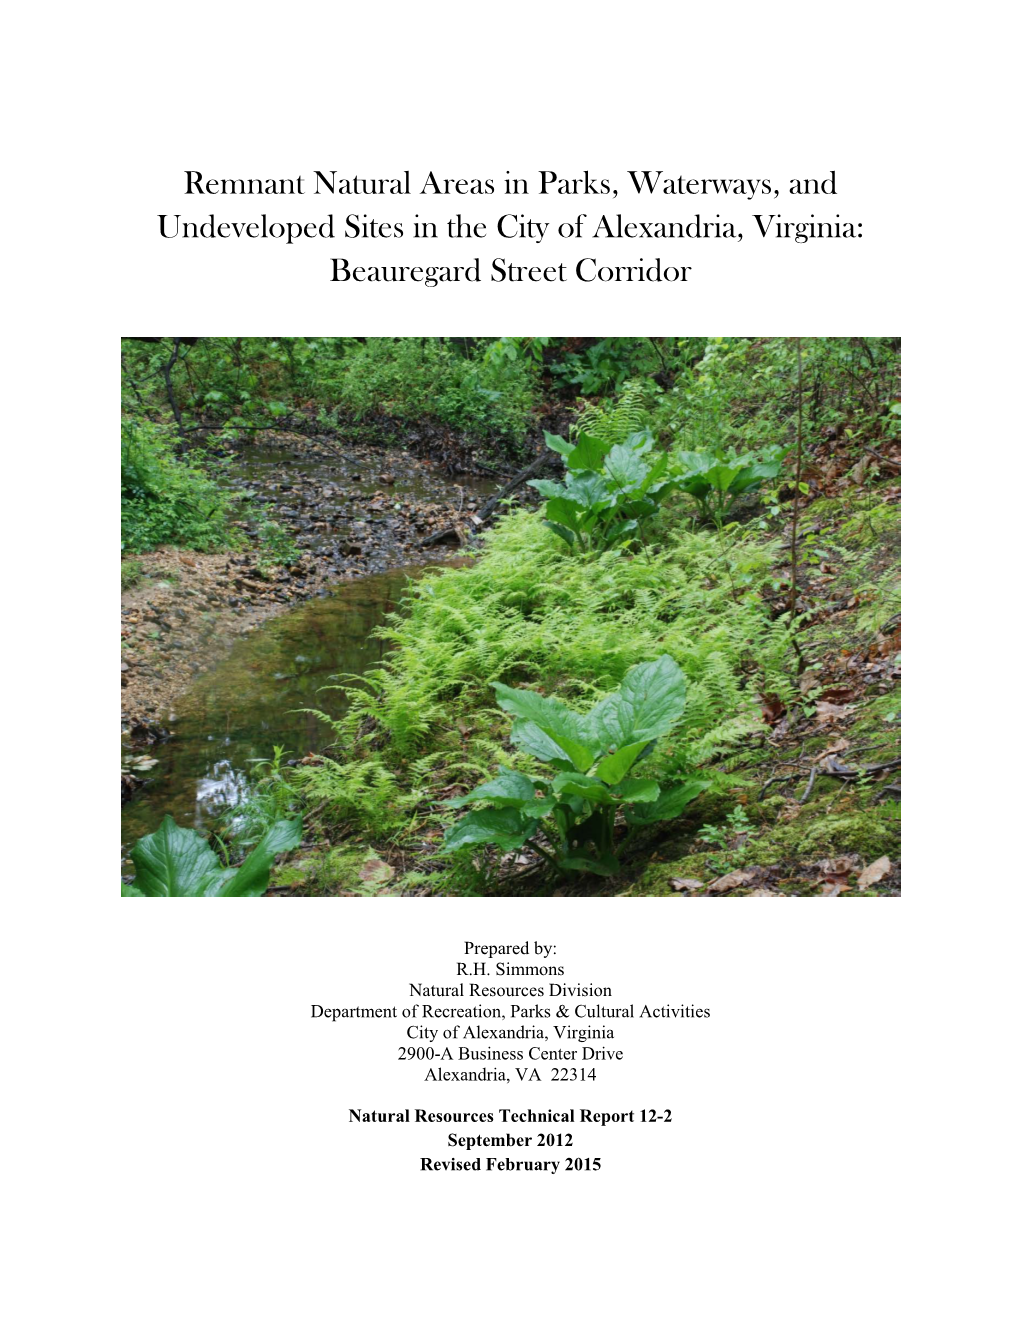 Remnant Natural Areas in Parks, Waterways, and Undeveloped Sites in the City of Alexandria, Virginia: Beauregard Street Corridor